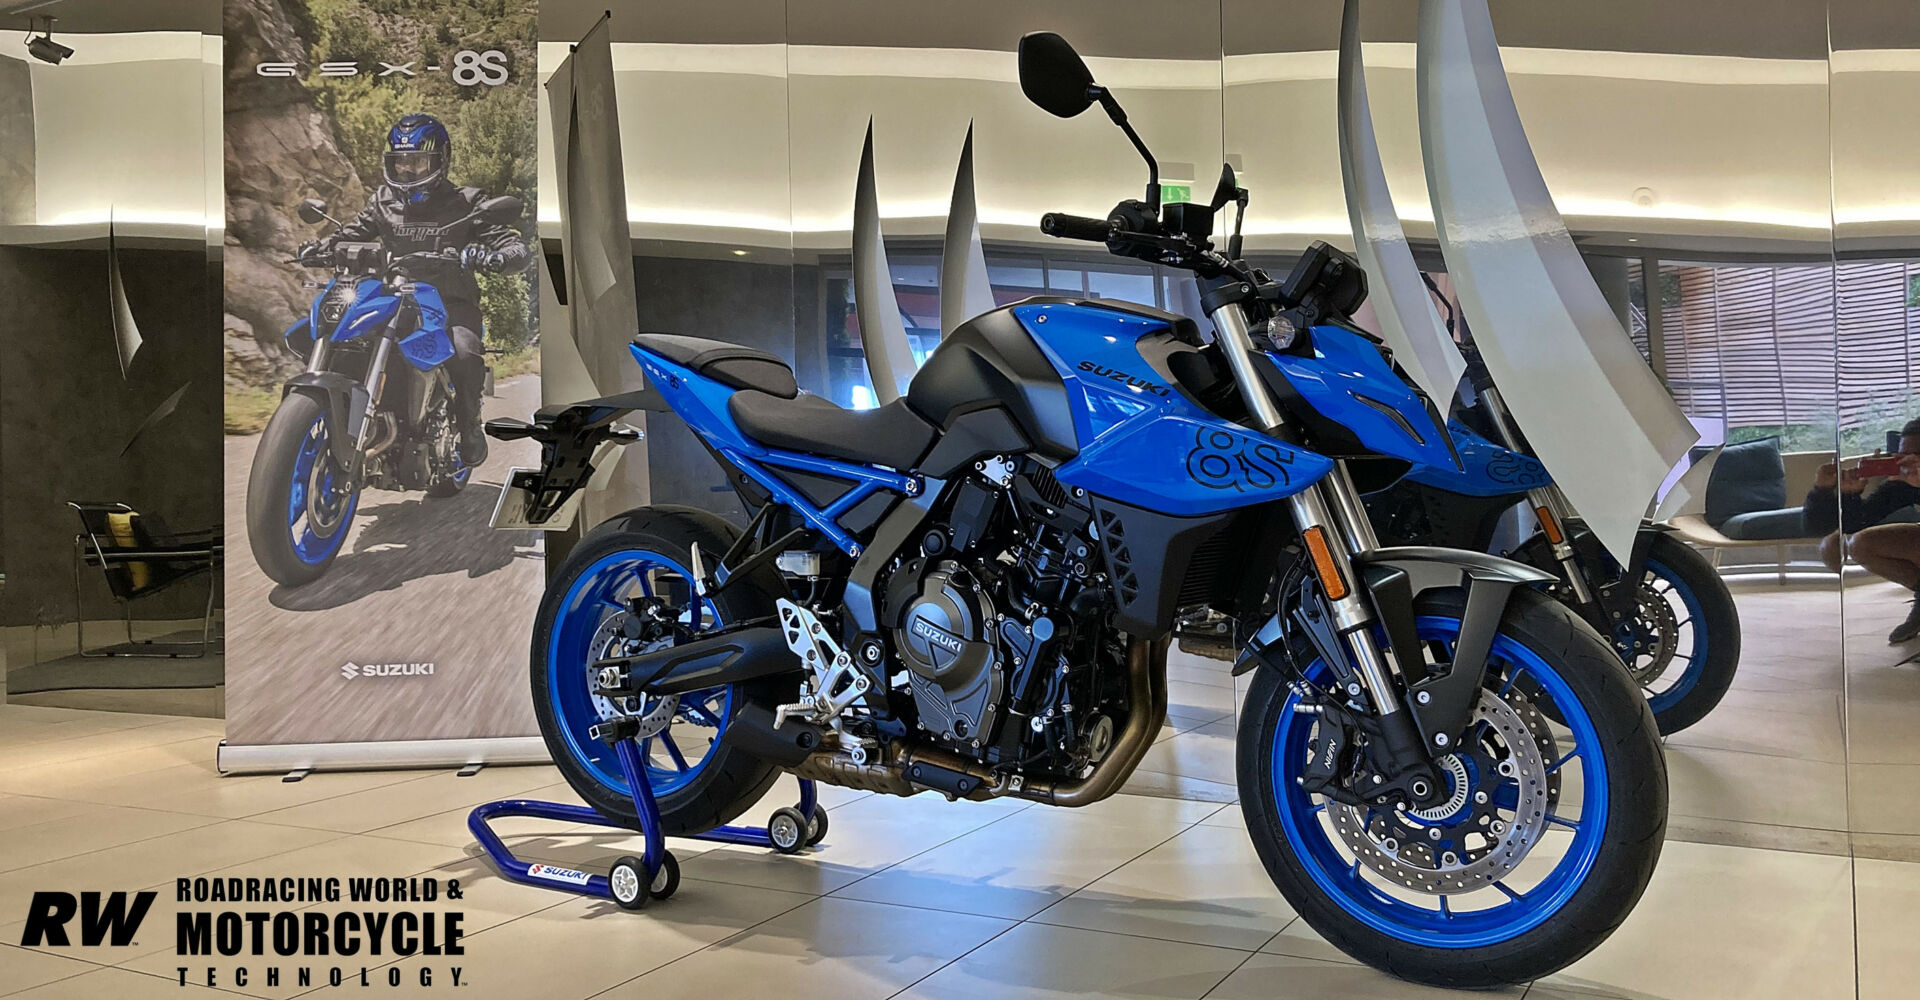 The 2023 Suzuki GSX-8S, Suzuki's latest entry into the naked sportbike segment. Think of it as everything riders wanted in an SV650, only more. Photo by Michael Gougis.